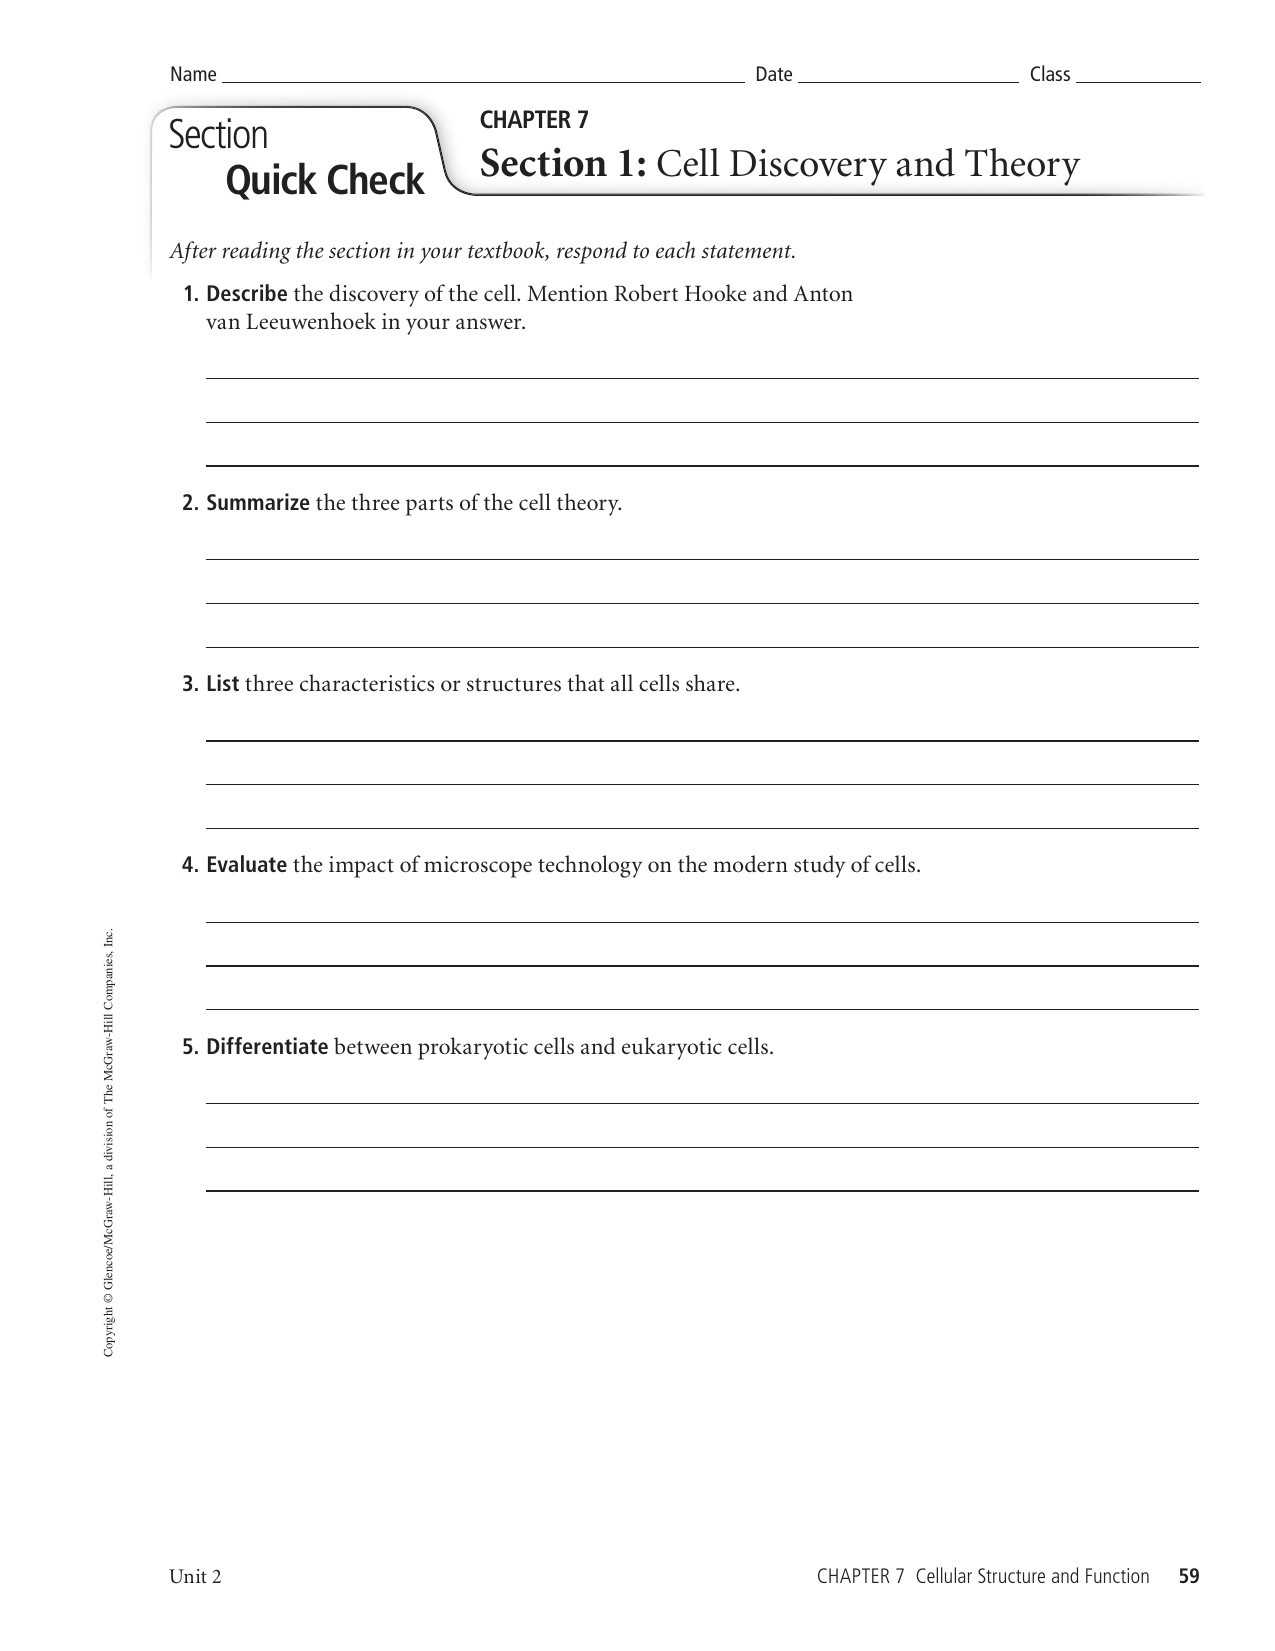 Mcgraw Hill Networks World History and Geography Worksheet Answers as Well as Mcgraw Hill Panies Inc Worksheet Answers Gallery Worksheet for